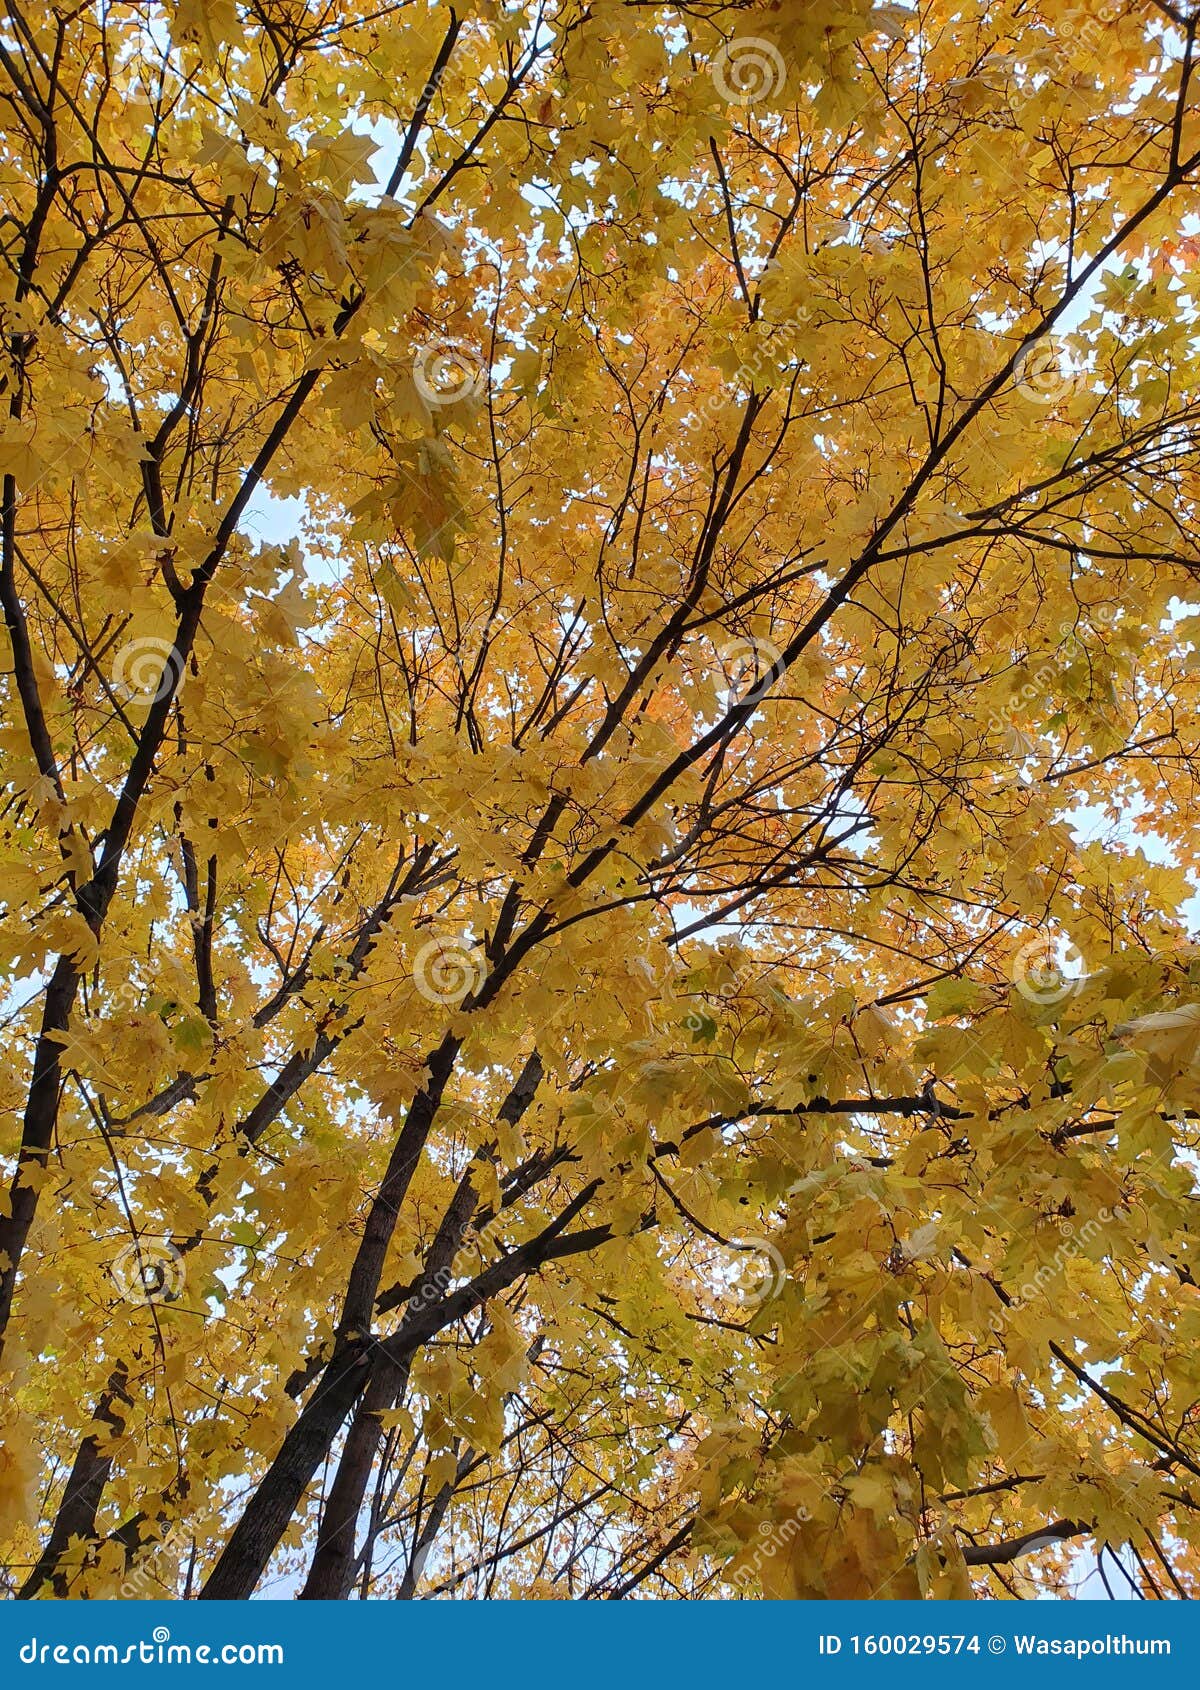 Yellow Leaves Tree in Autumn Vertical Stock Photo - Image of background ...